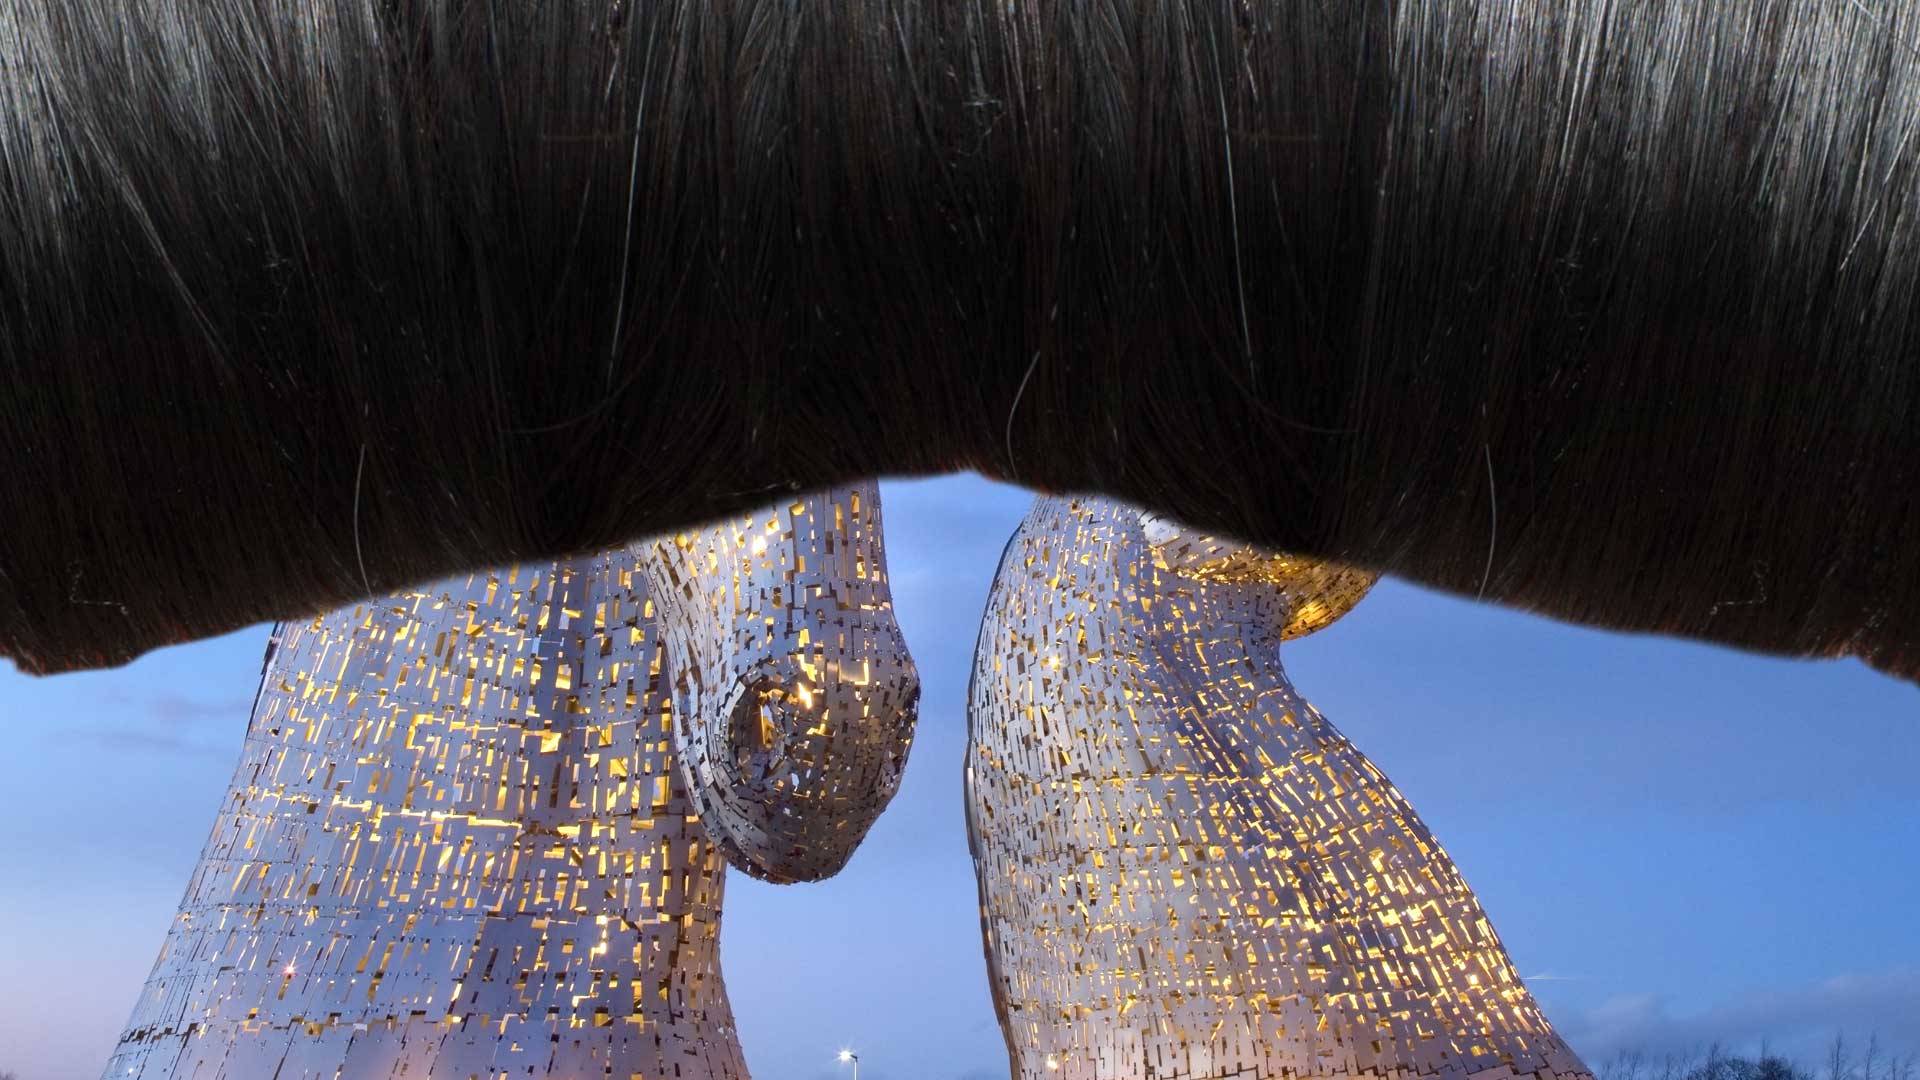 A long fringe obscuring a sculpture in Scotland